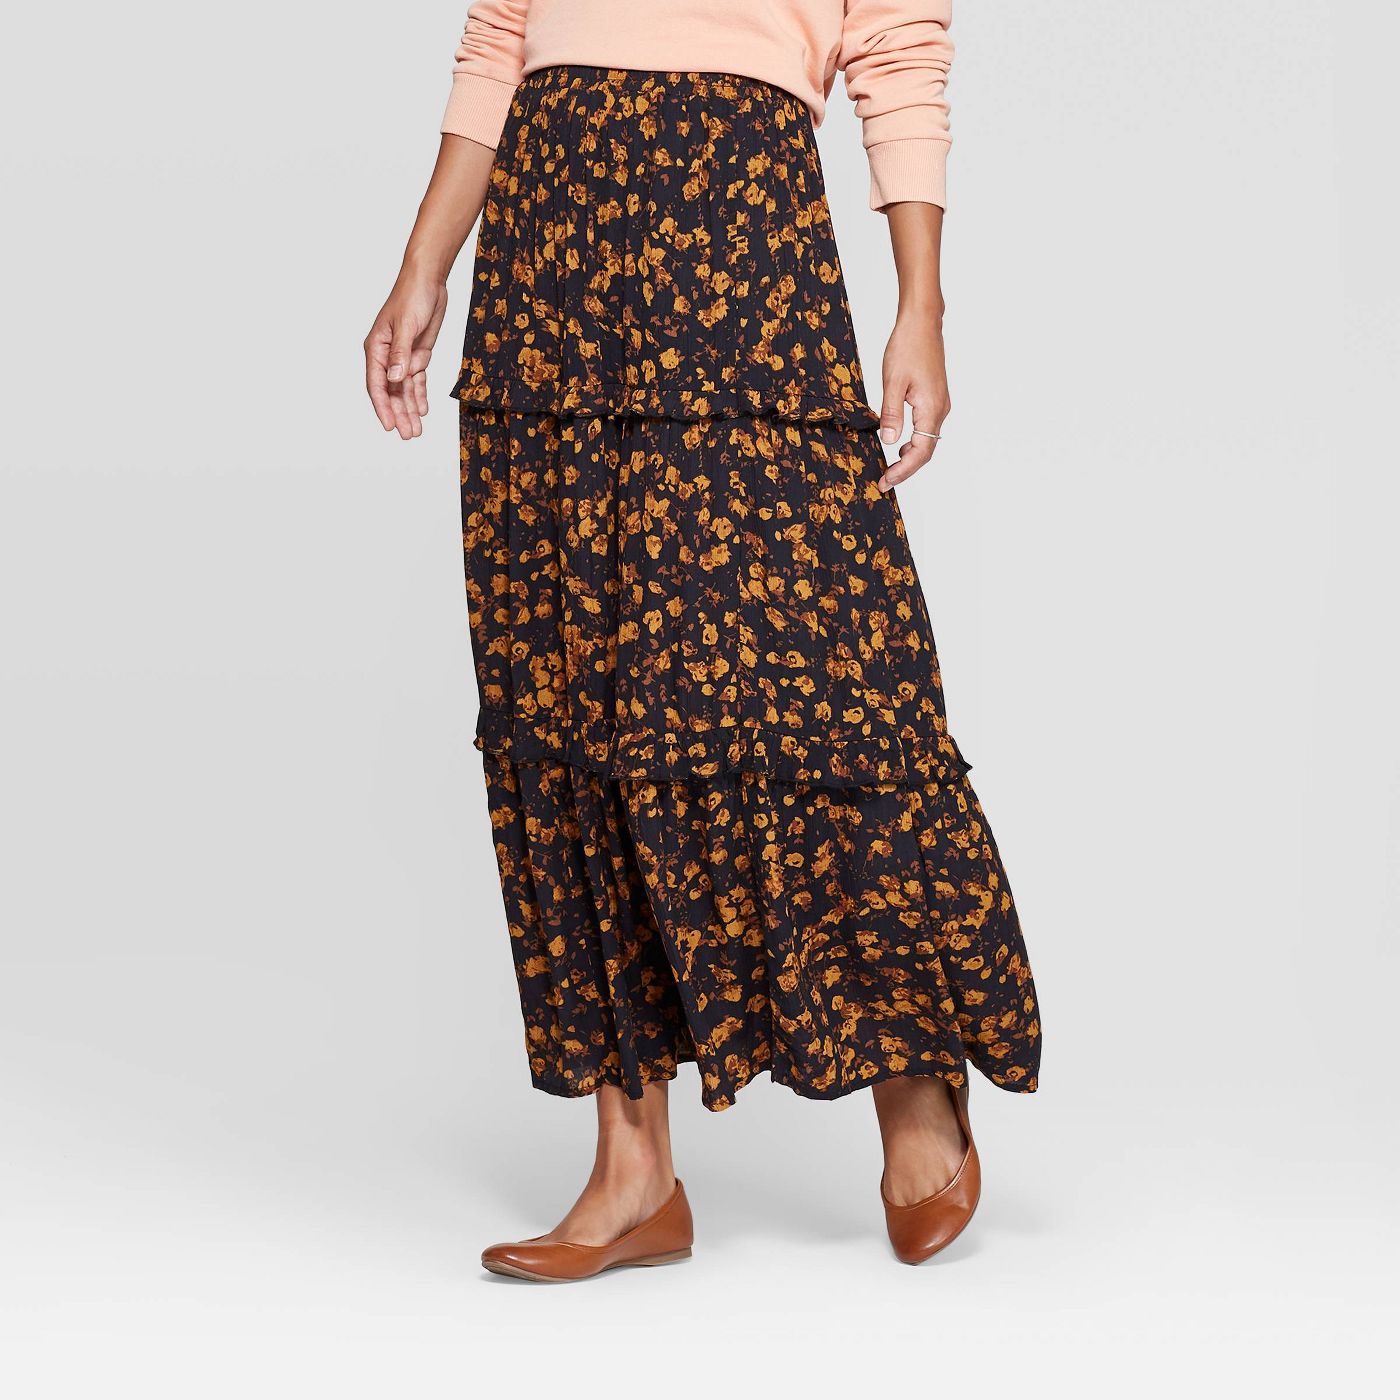 Women's Floral Print Tiered Ruffle Maxi Skirt - Universal Thread™ - image 1 of 3